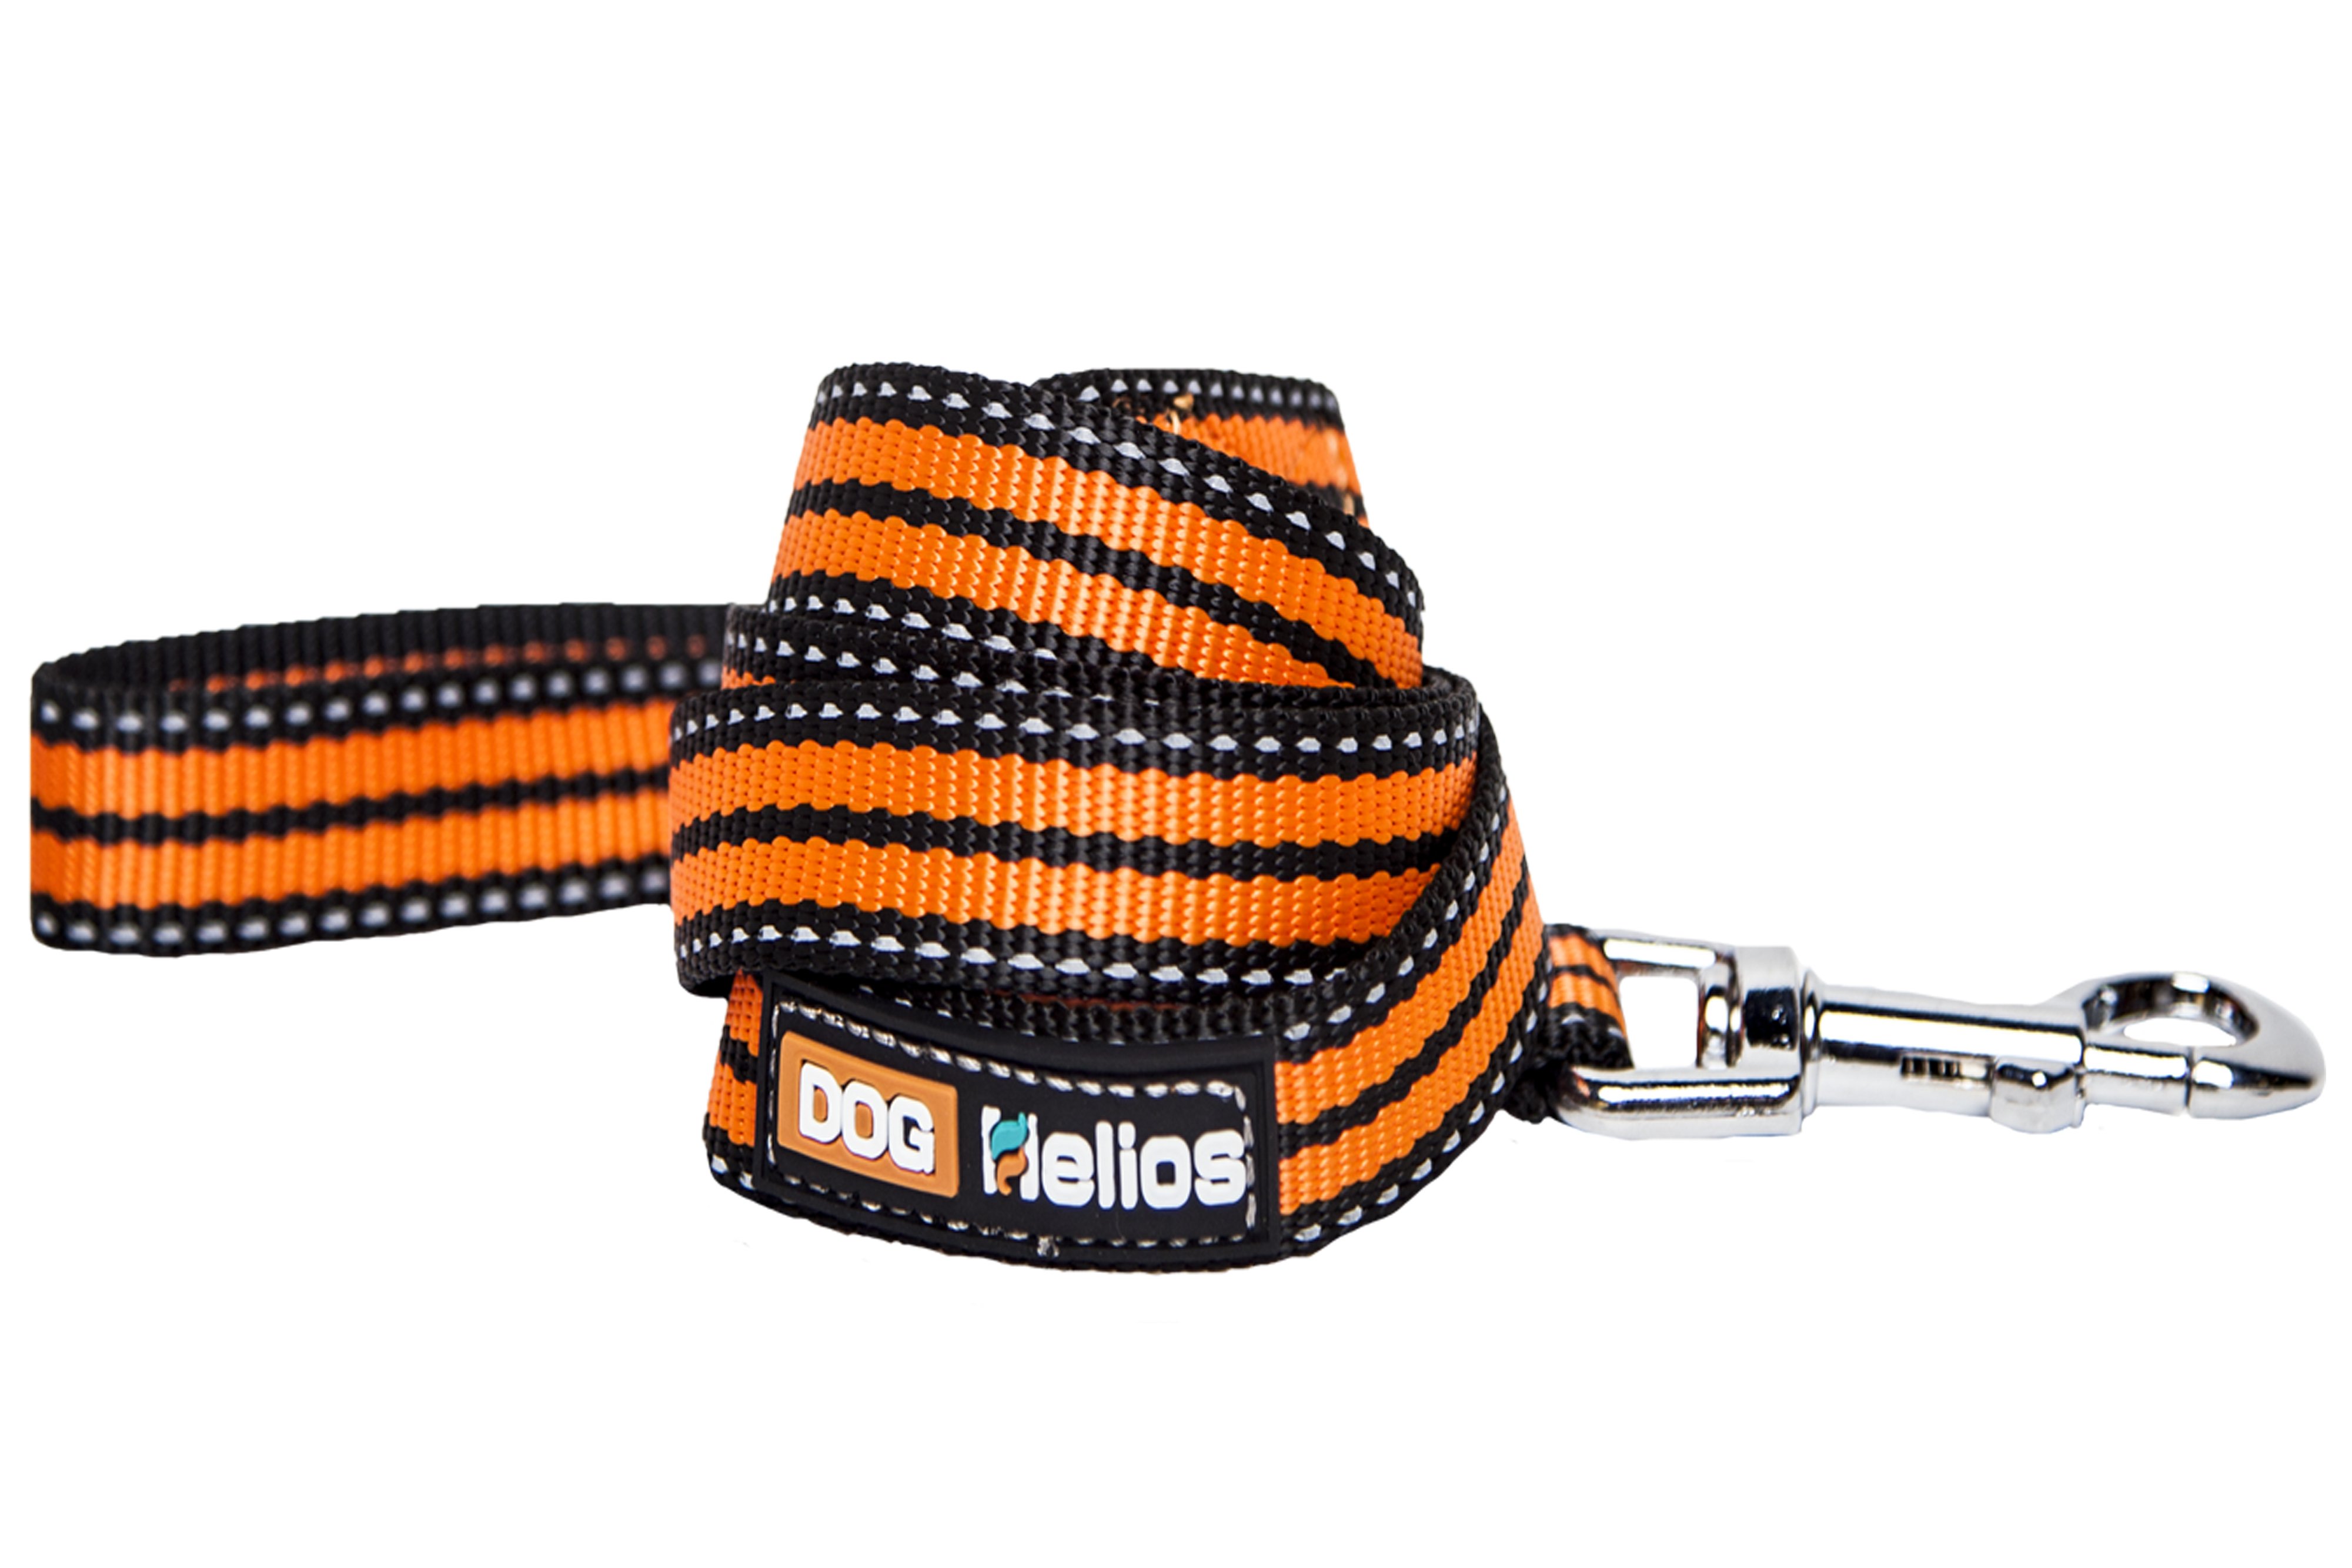 Helios Freestyle 3-in-1 Explorer Convertible Backpack, Harness and Leash - image 4 of 5